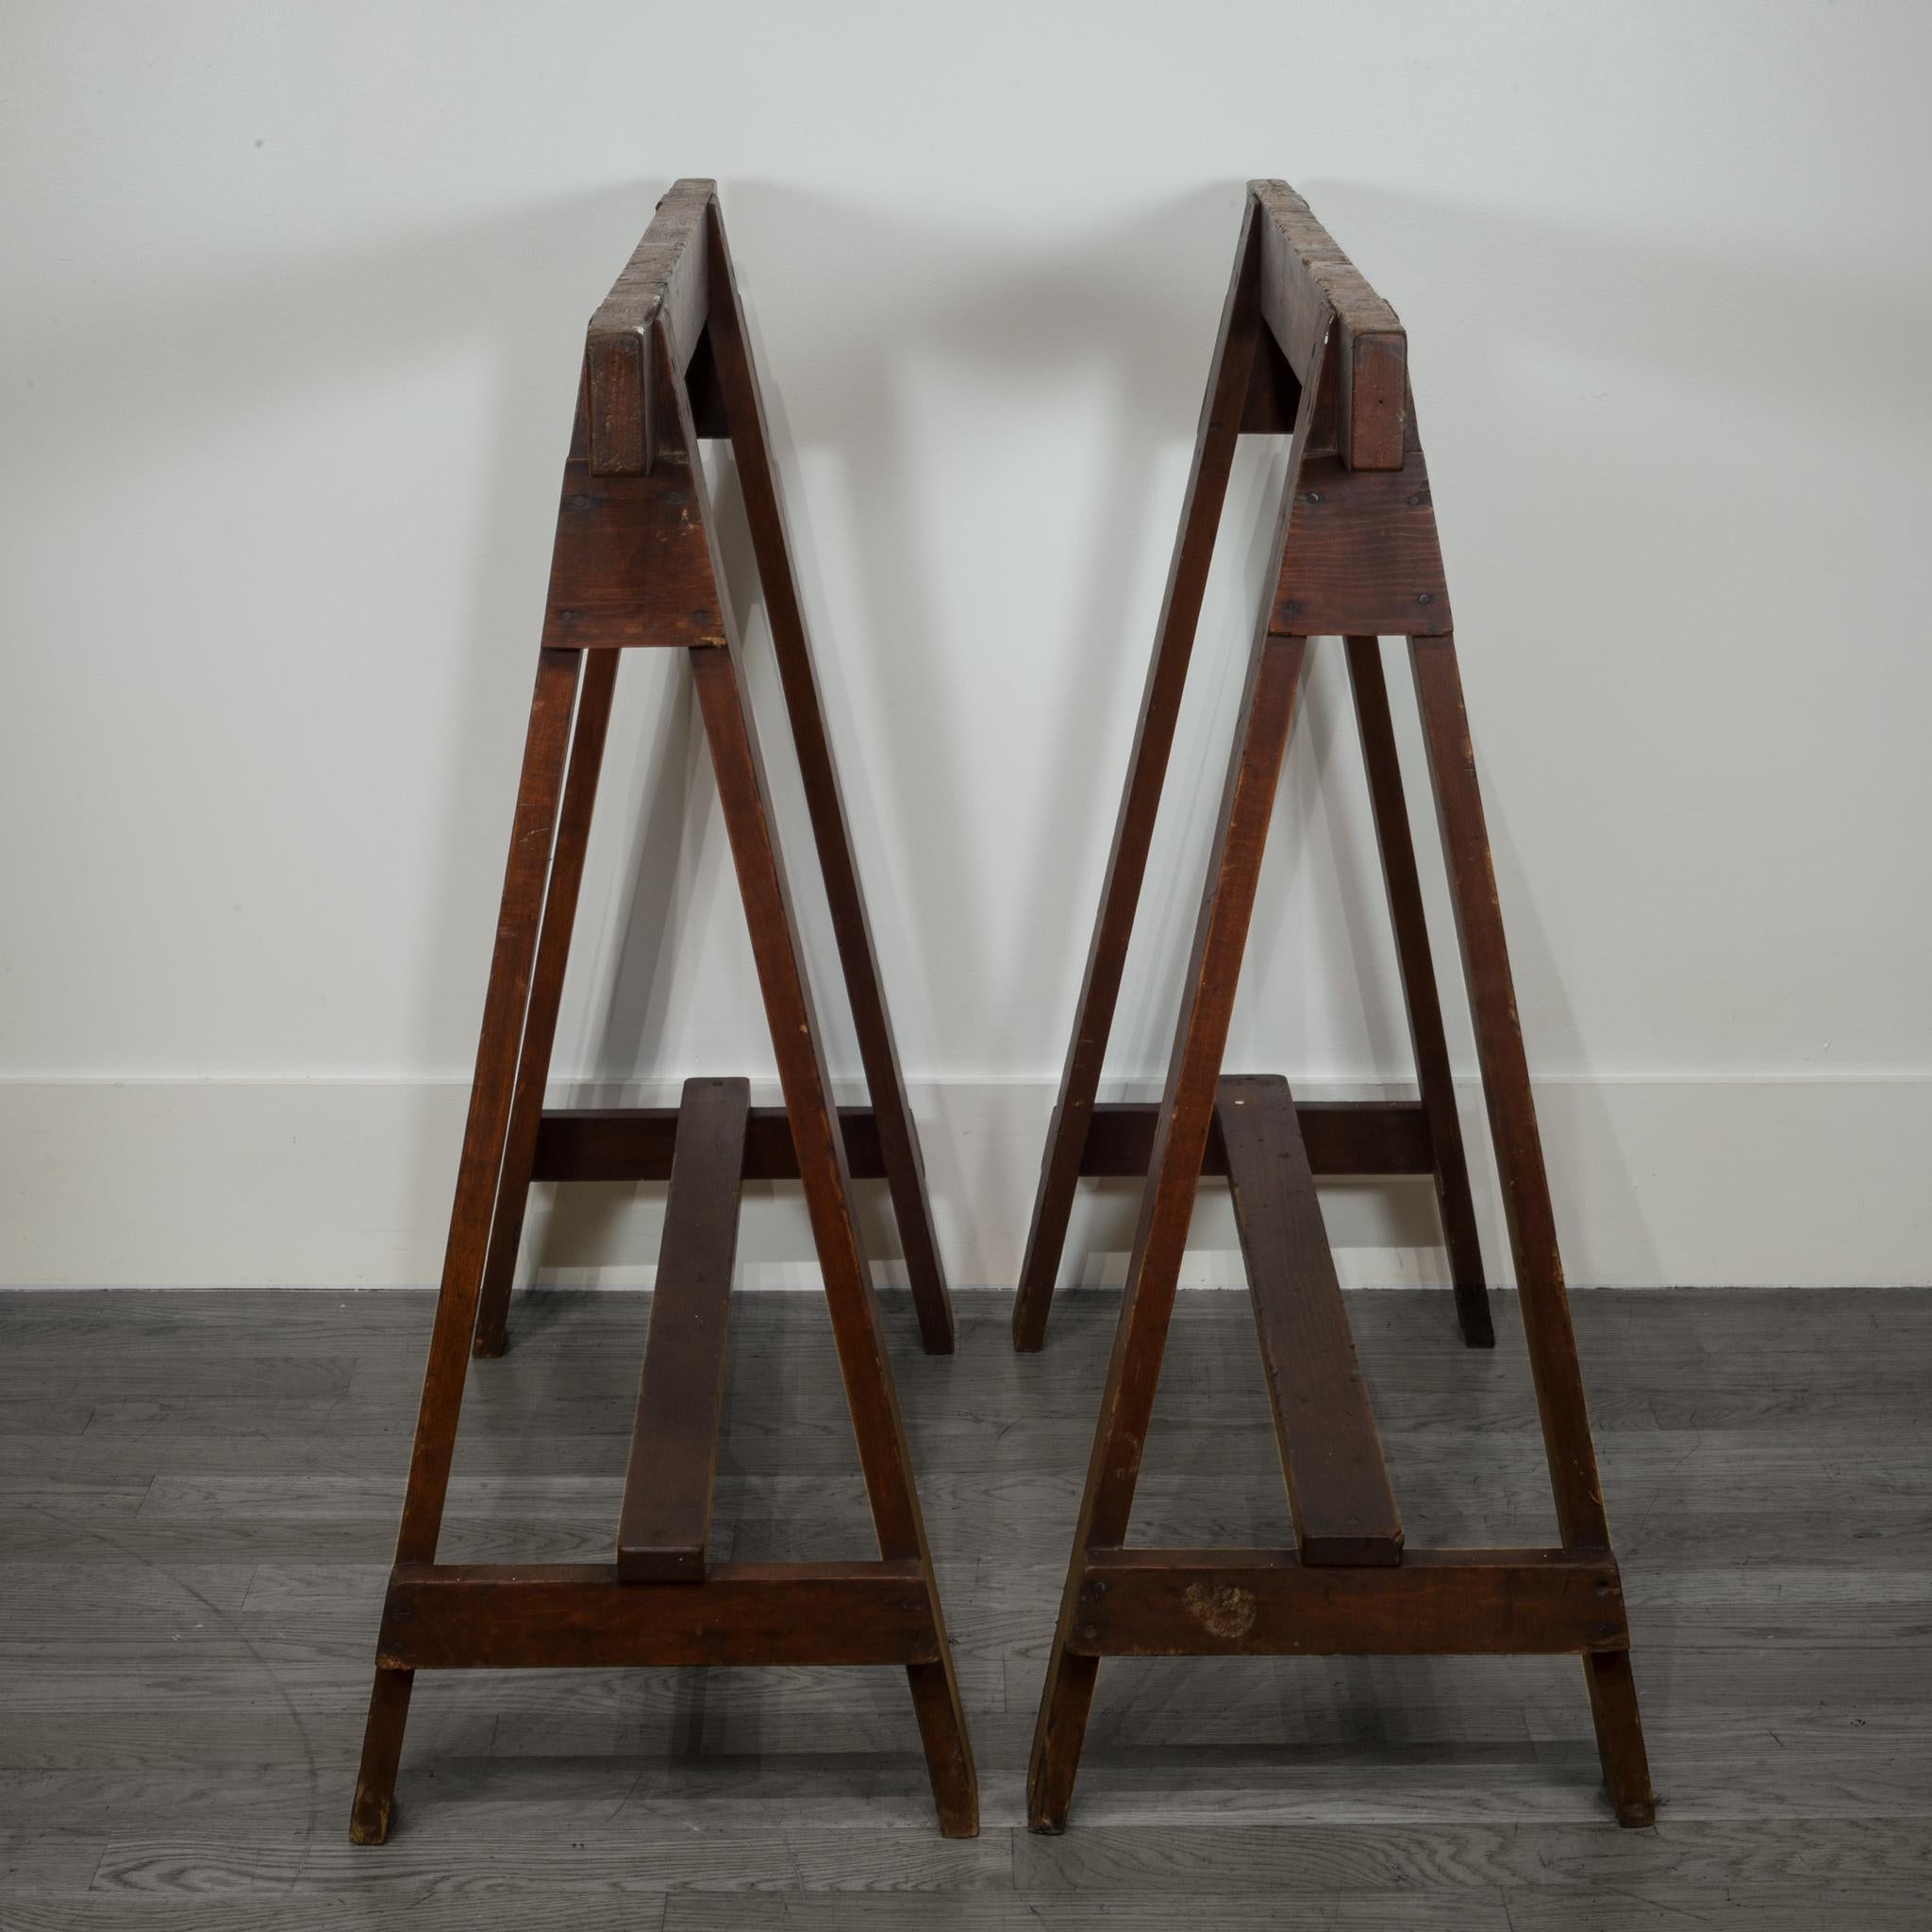 About

These are original pair of Douglas Fir sawhorses from 1910 in the French treteaux style. The style is defined by the leg join which has a beveled double angle at the top. The pieces have been lightly refinished and have retained their